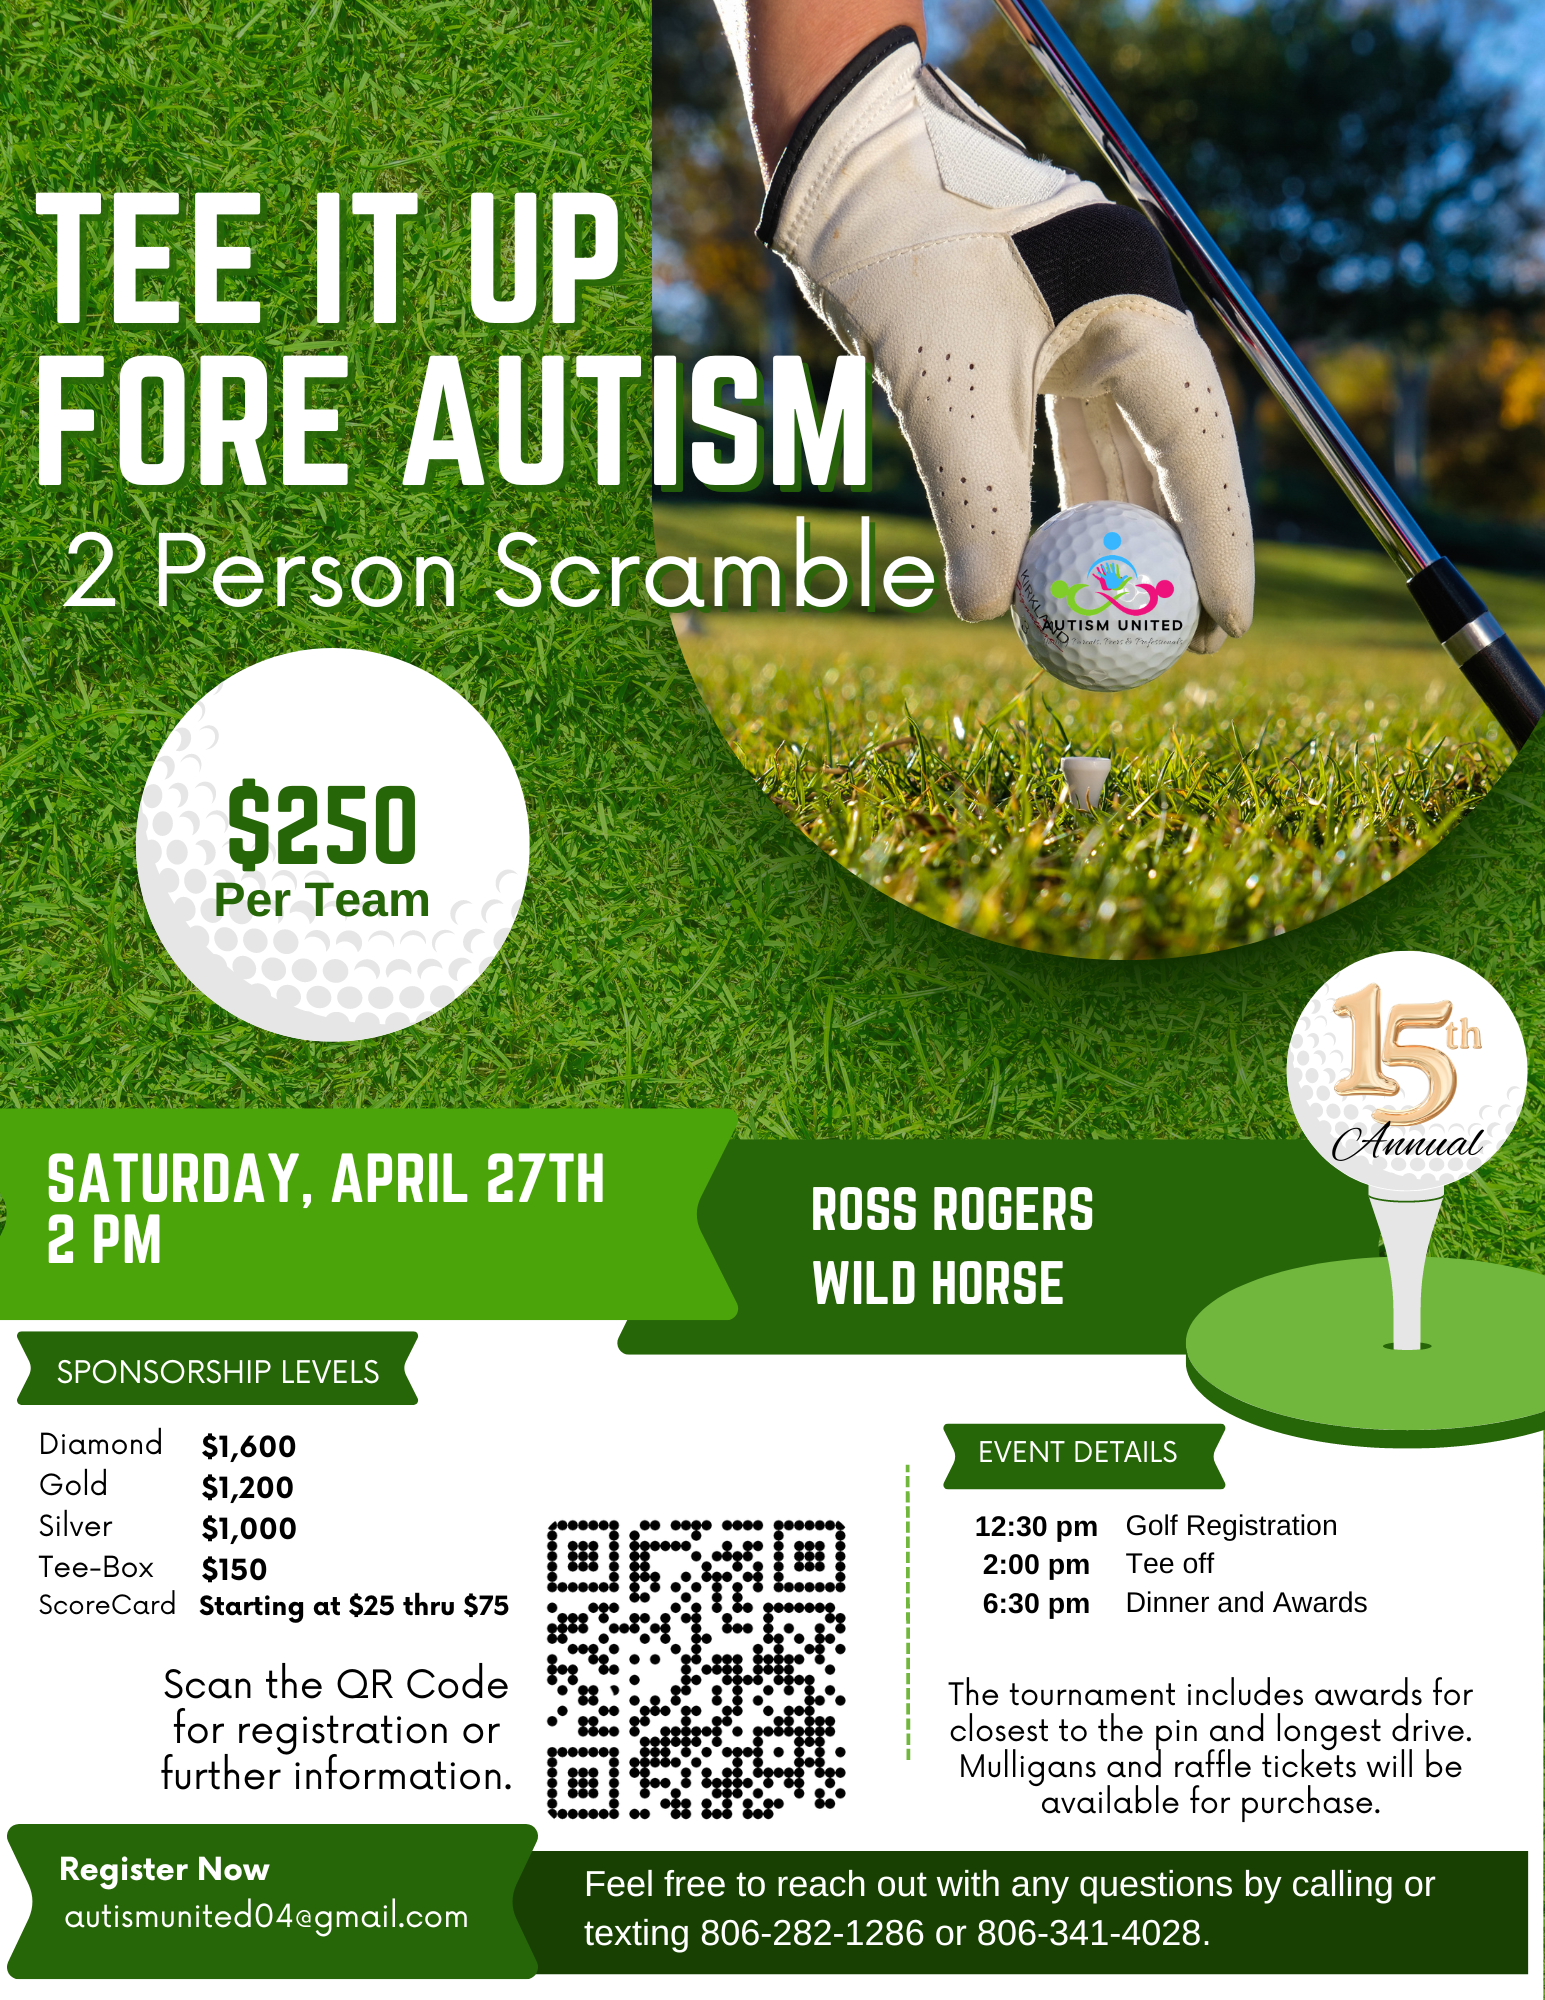 Tee It Up Fore Autism @ Ross Rogers Wild Horse | Amarillo | Texas | United States